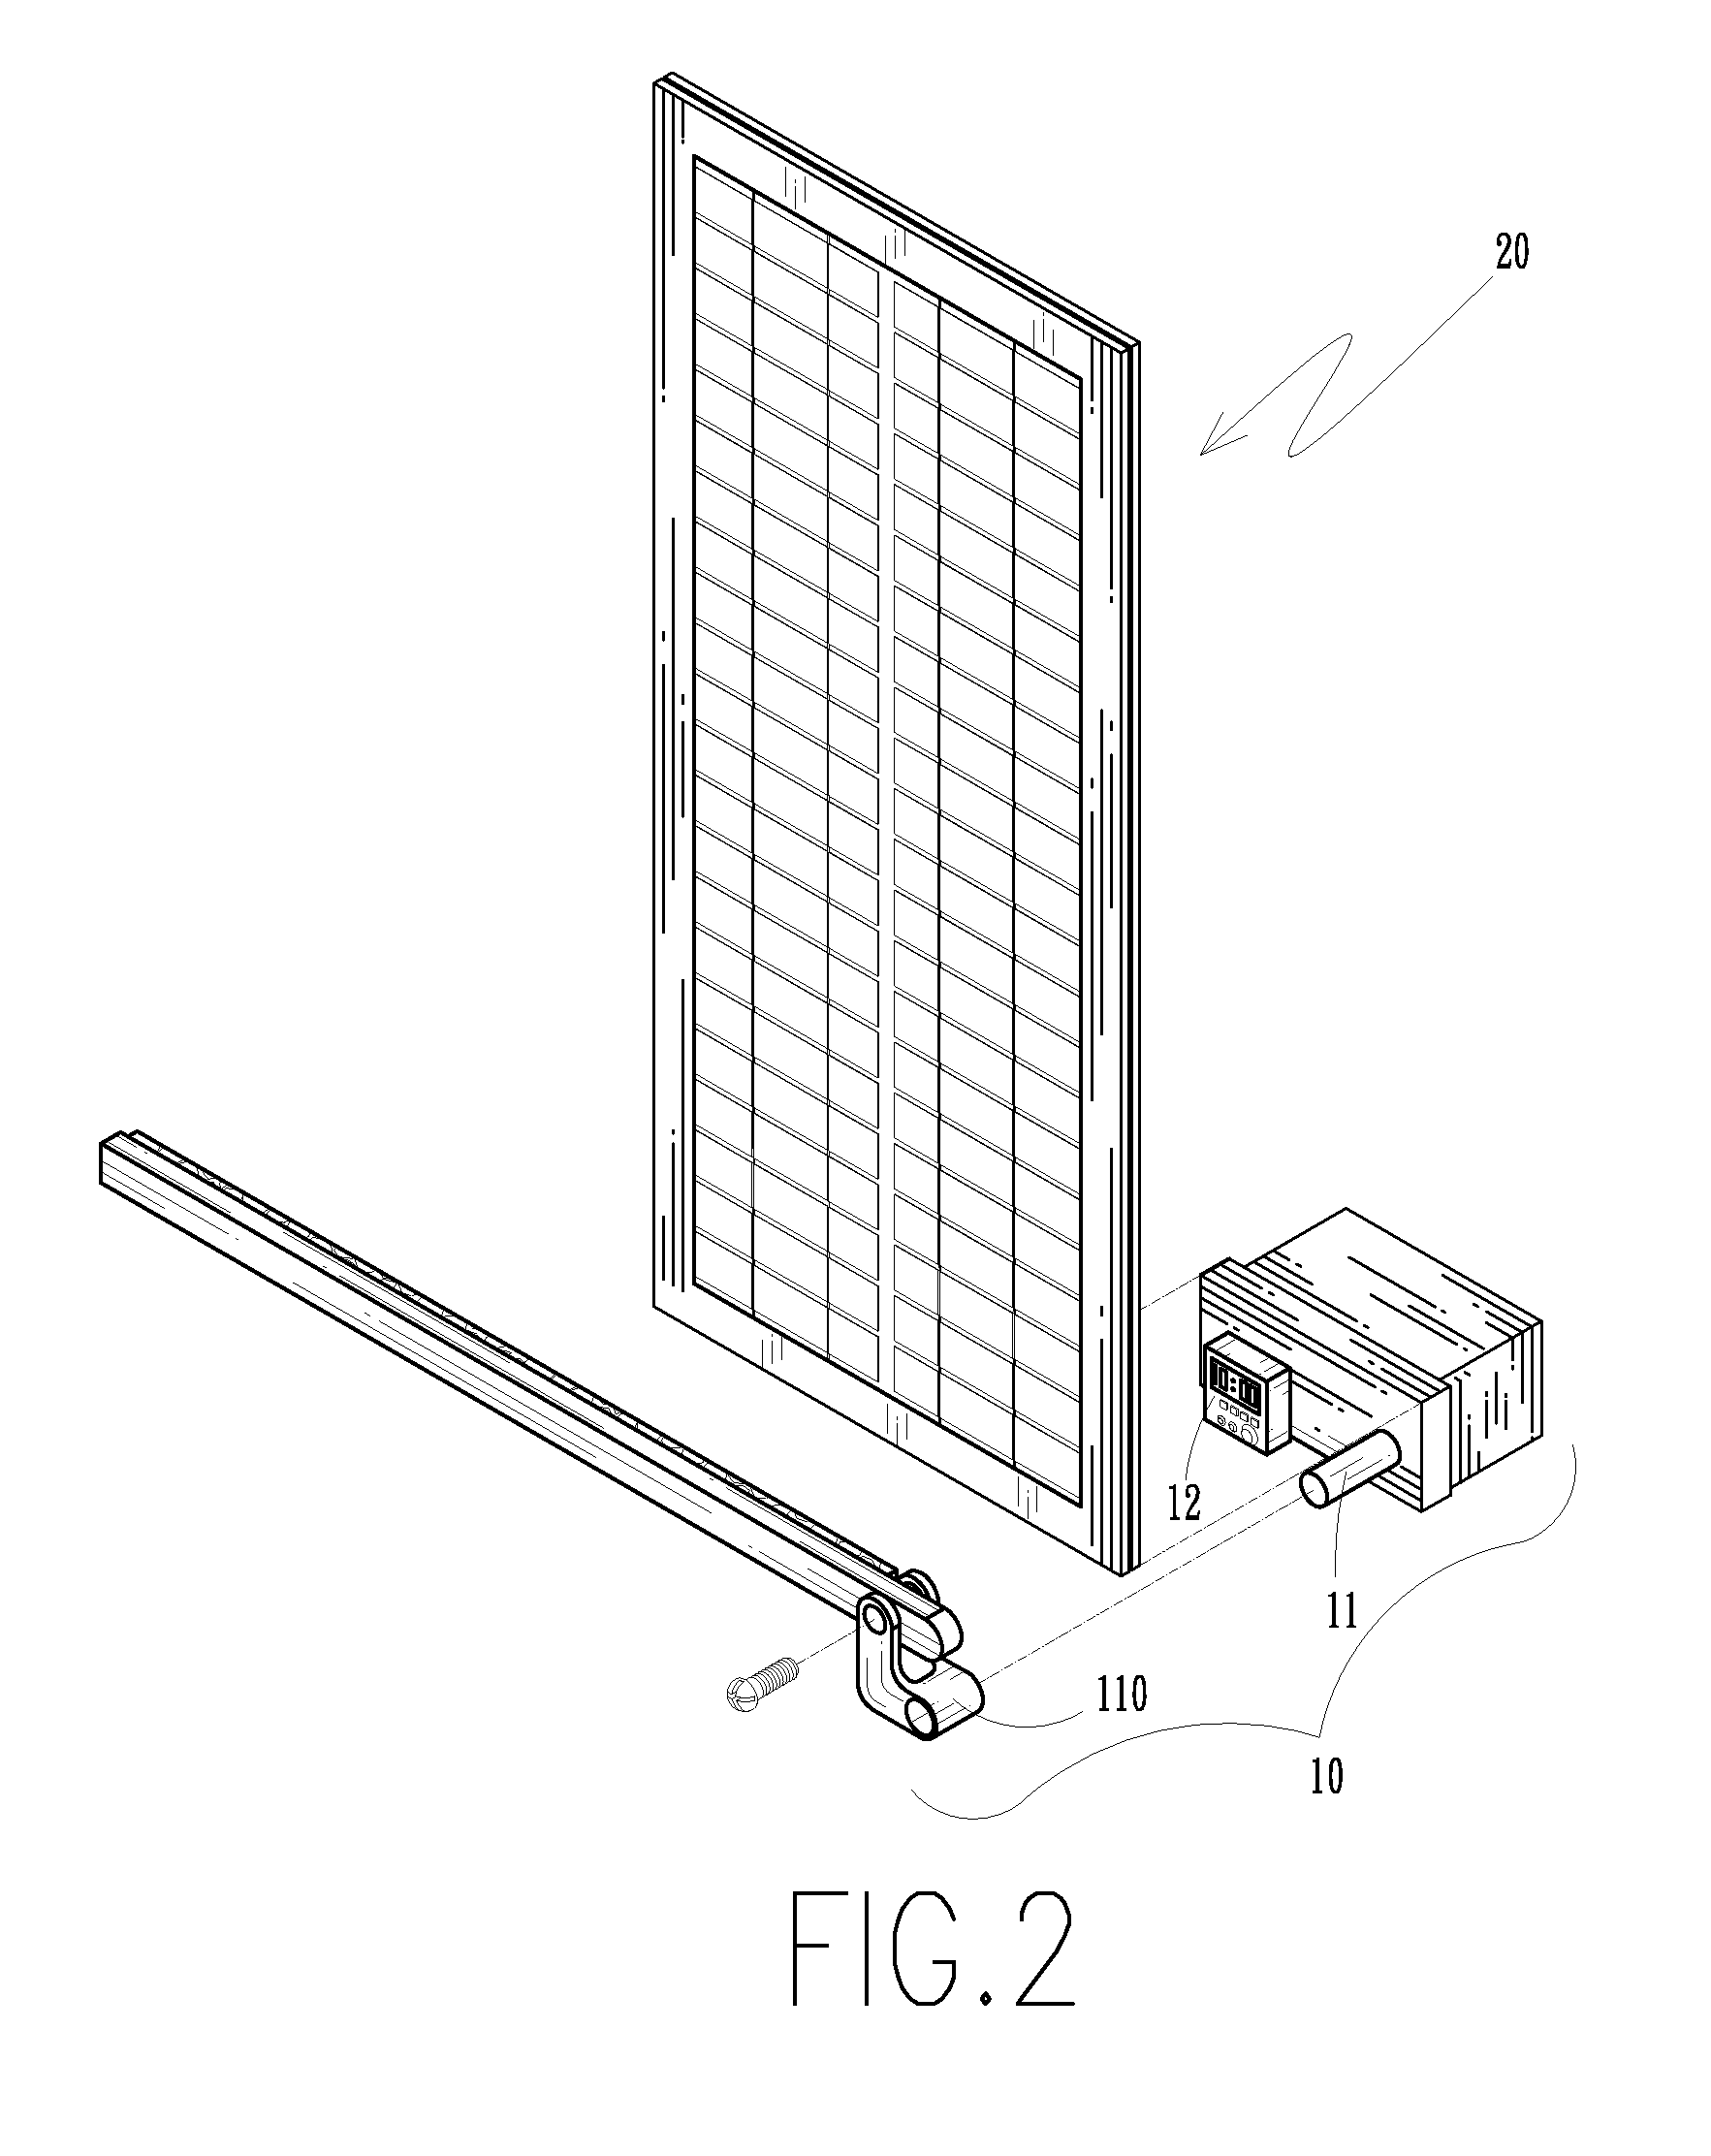 Cleaning apparatus for solar panels